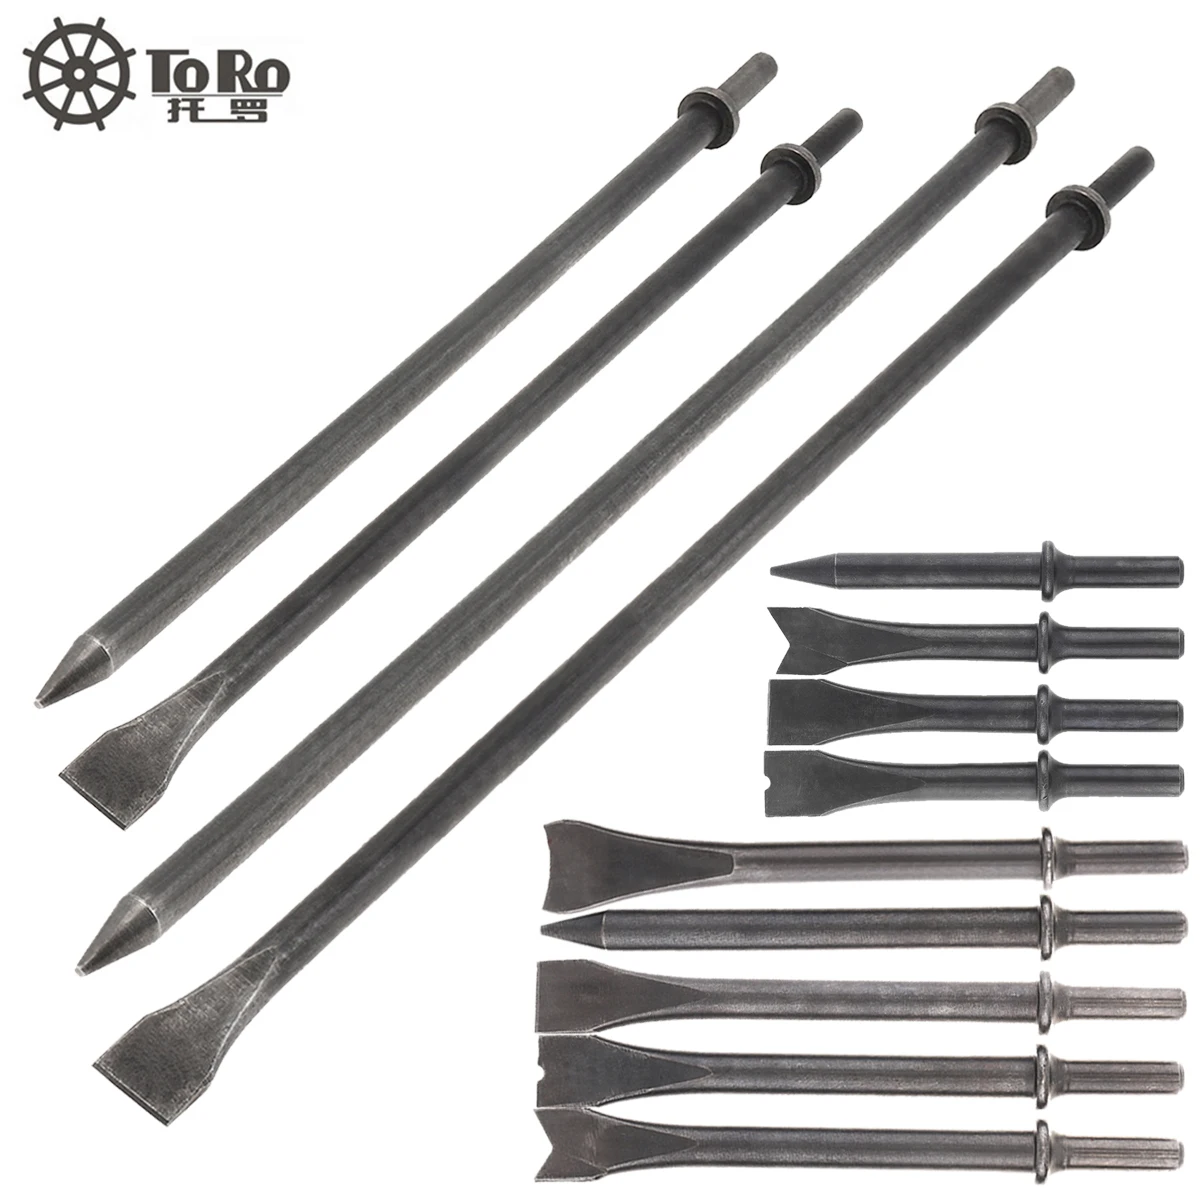 6pcs set small of air rivets 45 steel solid rivet impact head supports air tools for rust removal drilling 4/5pcs/set Air Chisel Impact Head Hard 45# Steel 125/175mm Solid Long Impact Head Support PneumaticTool for Cutting Removal